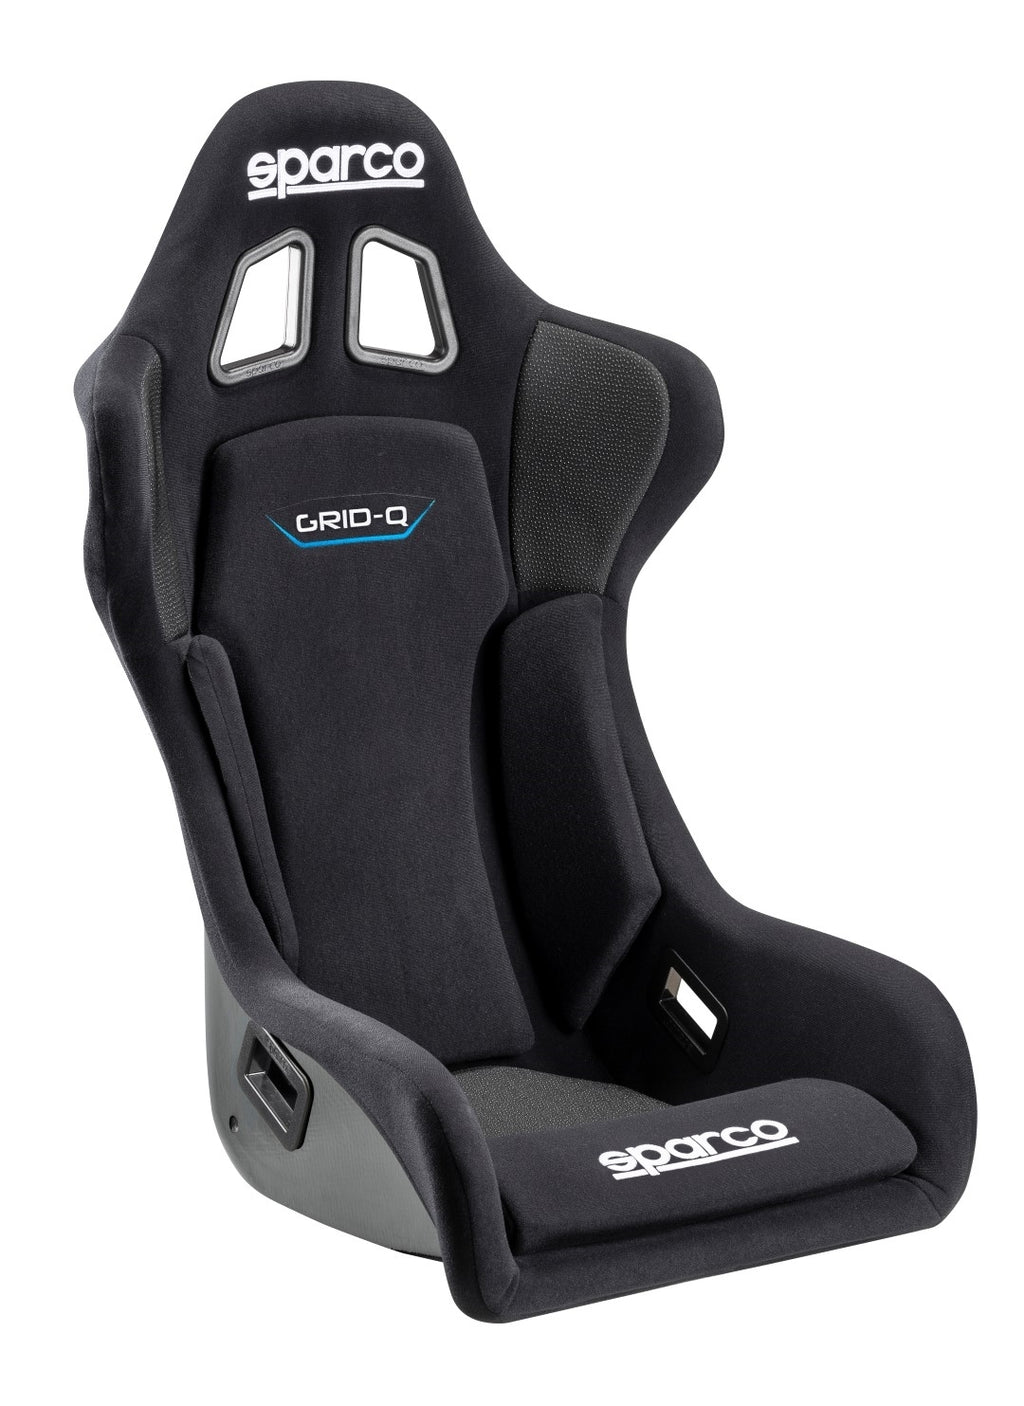 Sparco - Grid Q Competition Seat